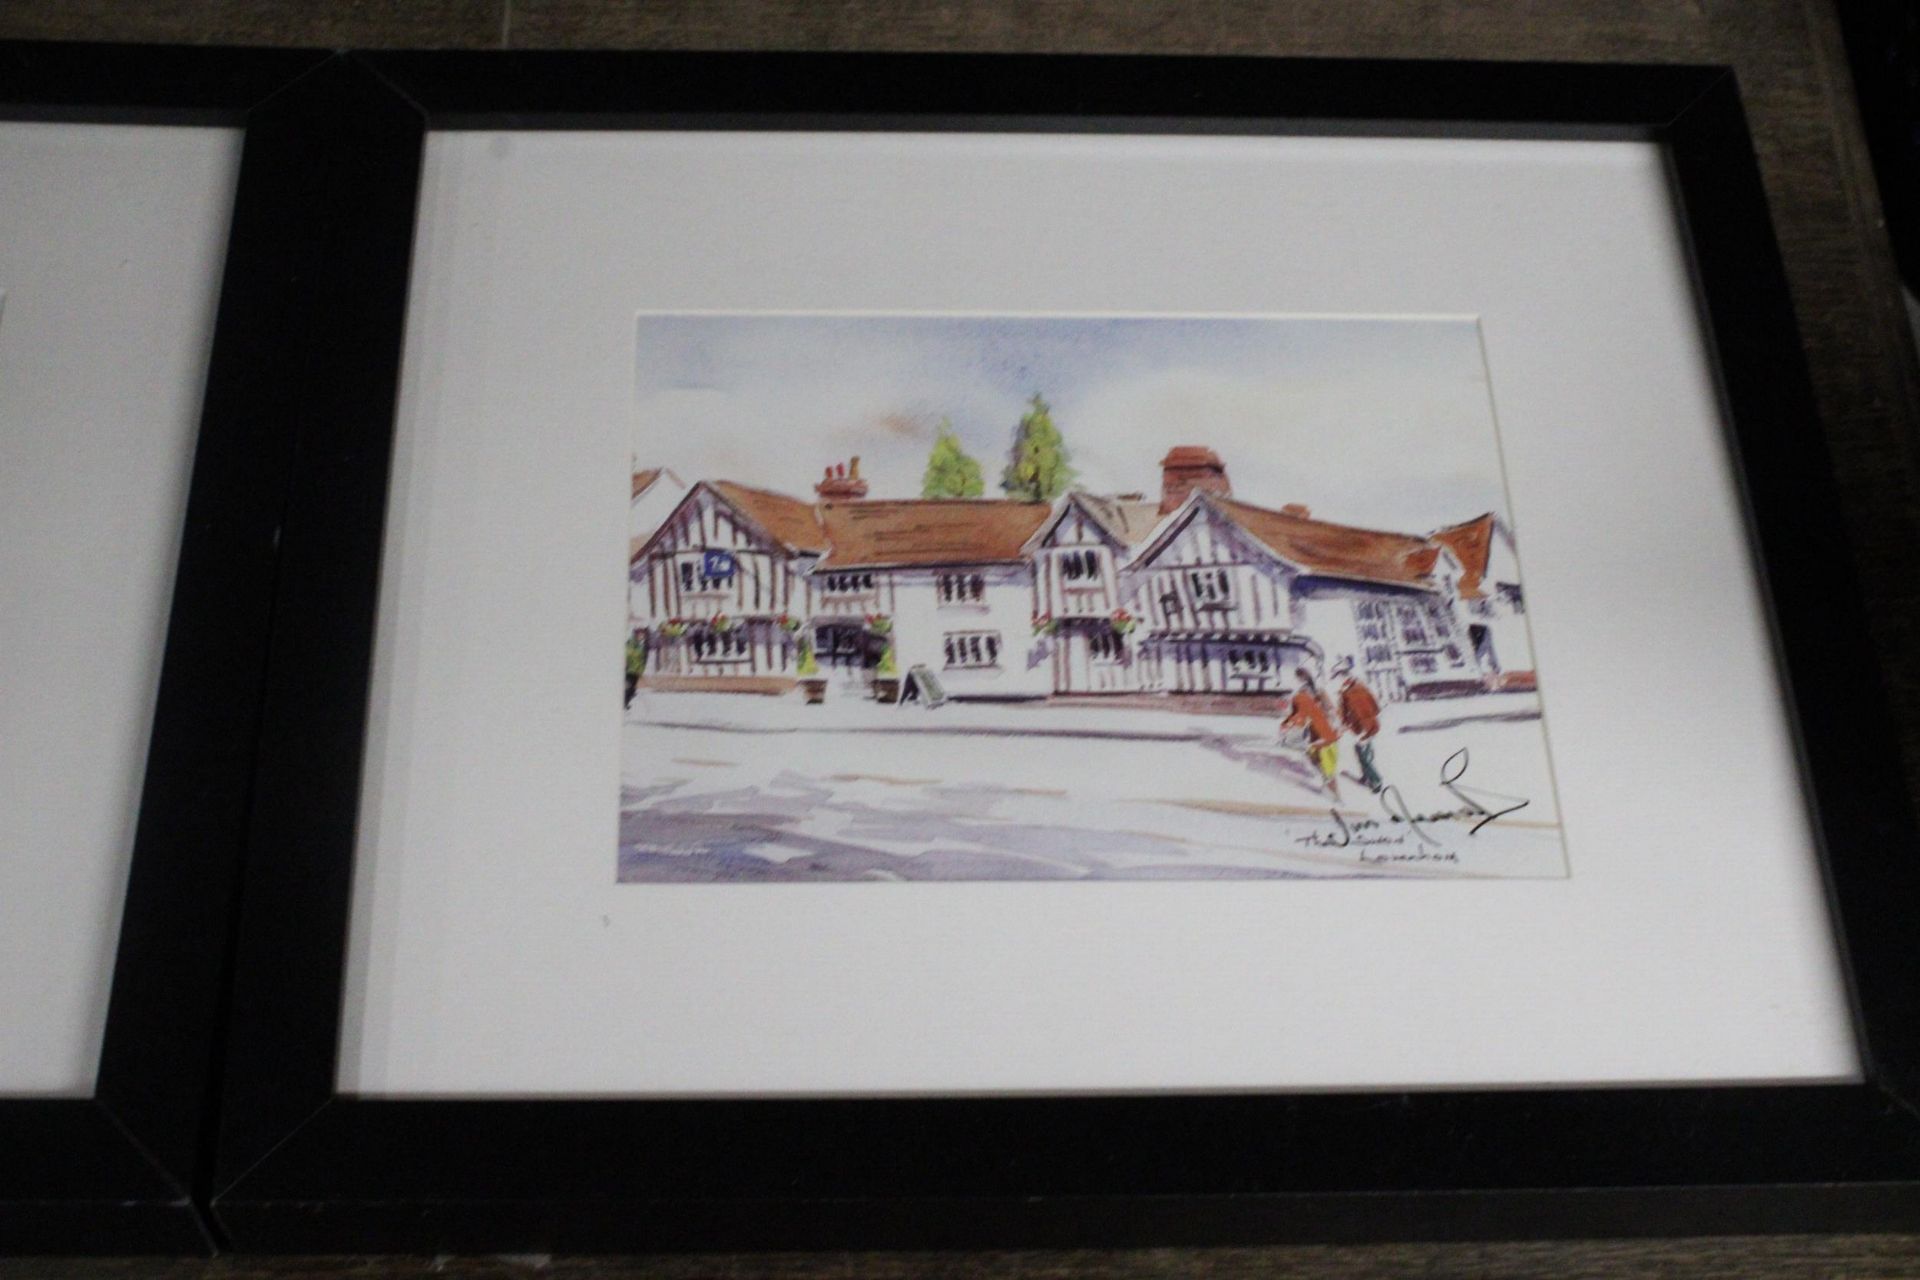 TWO FRAMED WATERCOLOURS ONE OF A BOATING SCENE AND THE OTHER A TOWN SCENE BOTH WITH SIGNATURES - Image 3 of 5